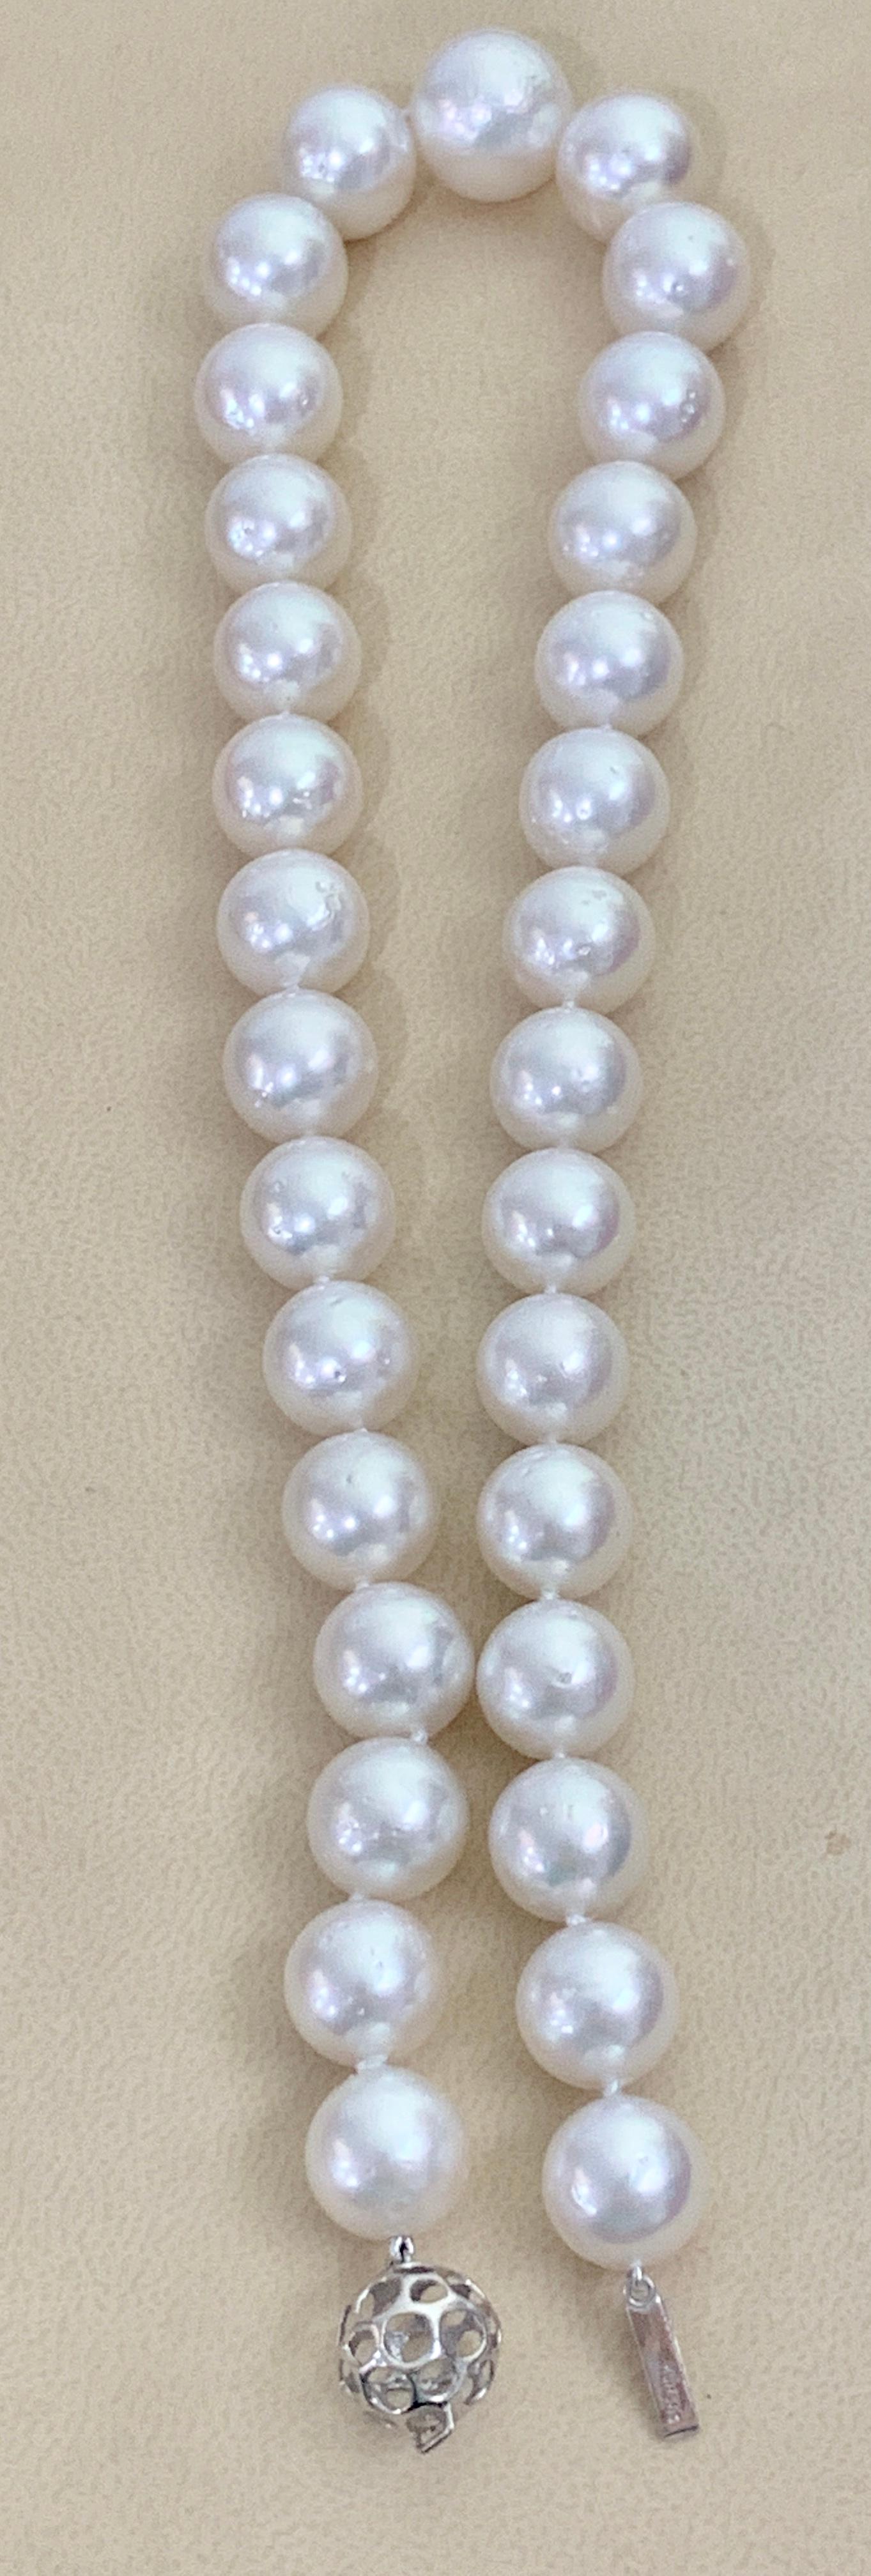 White South Sea Pearls Long Strand Necklace 14 Karat Gold Clasp For Sale 1